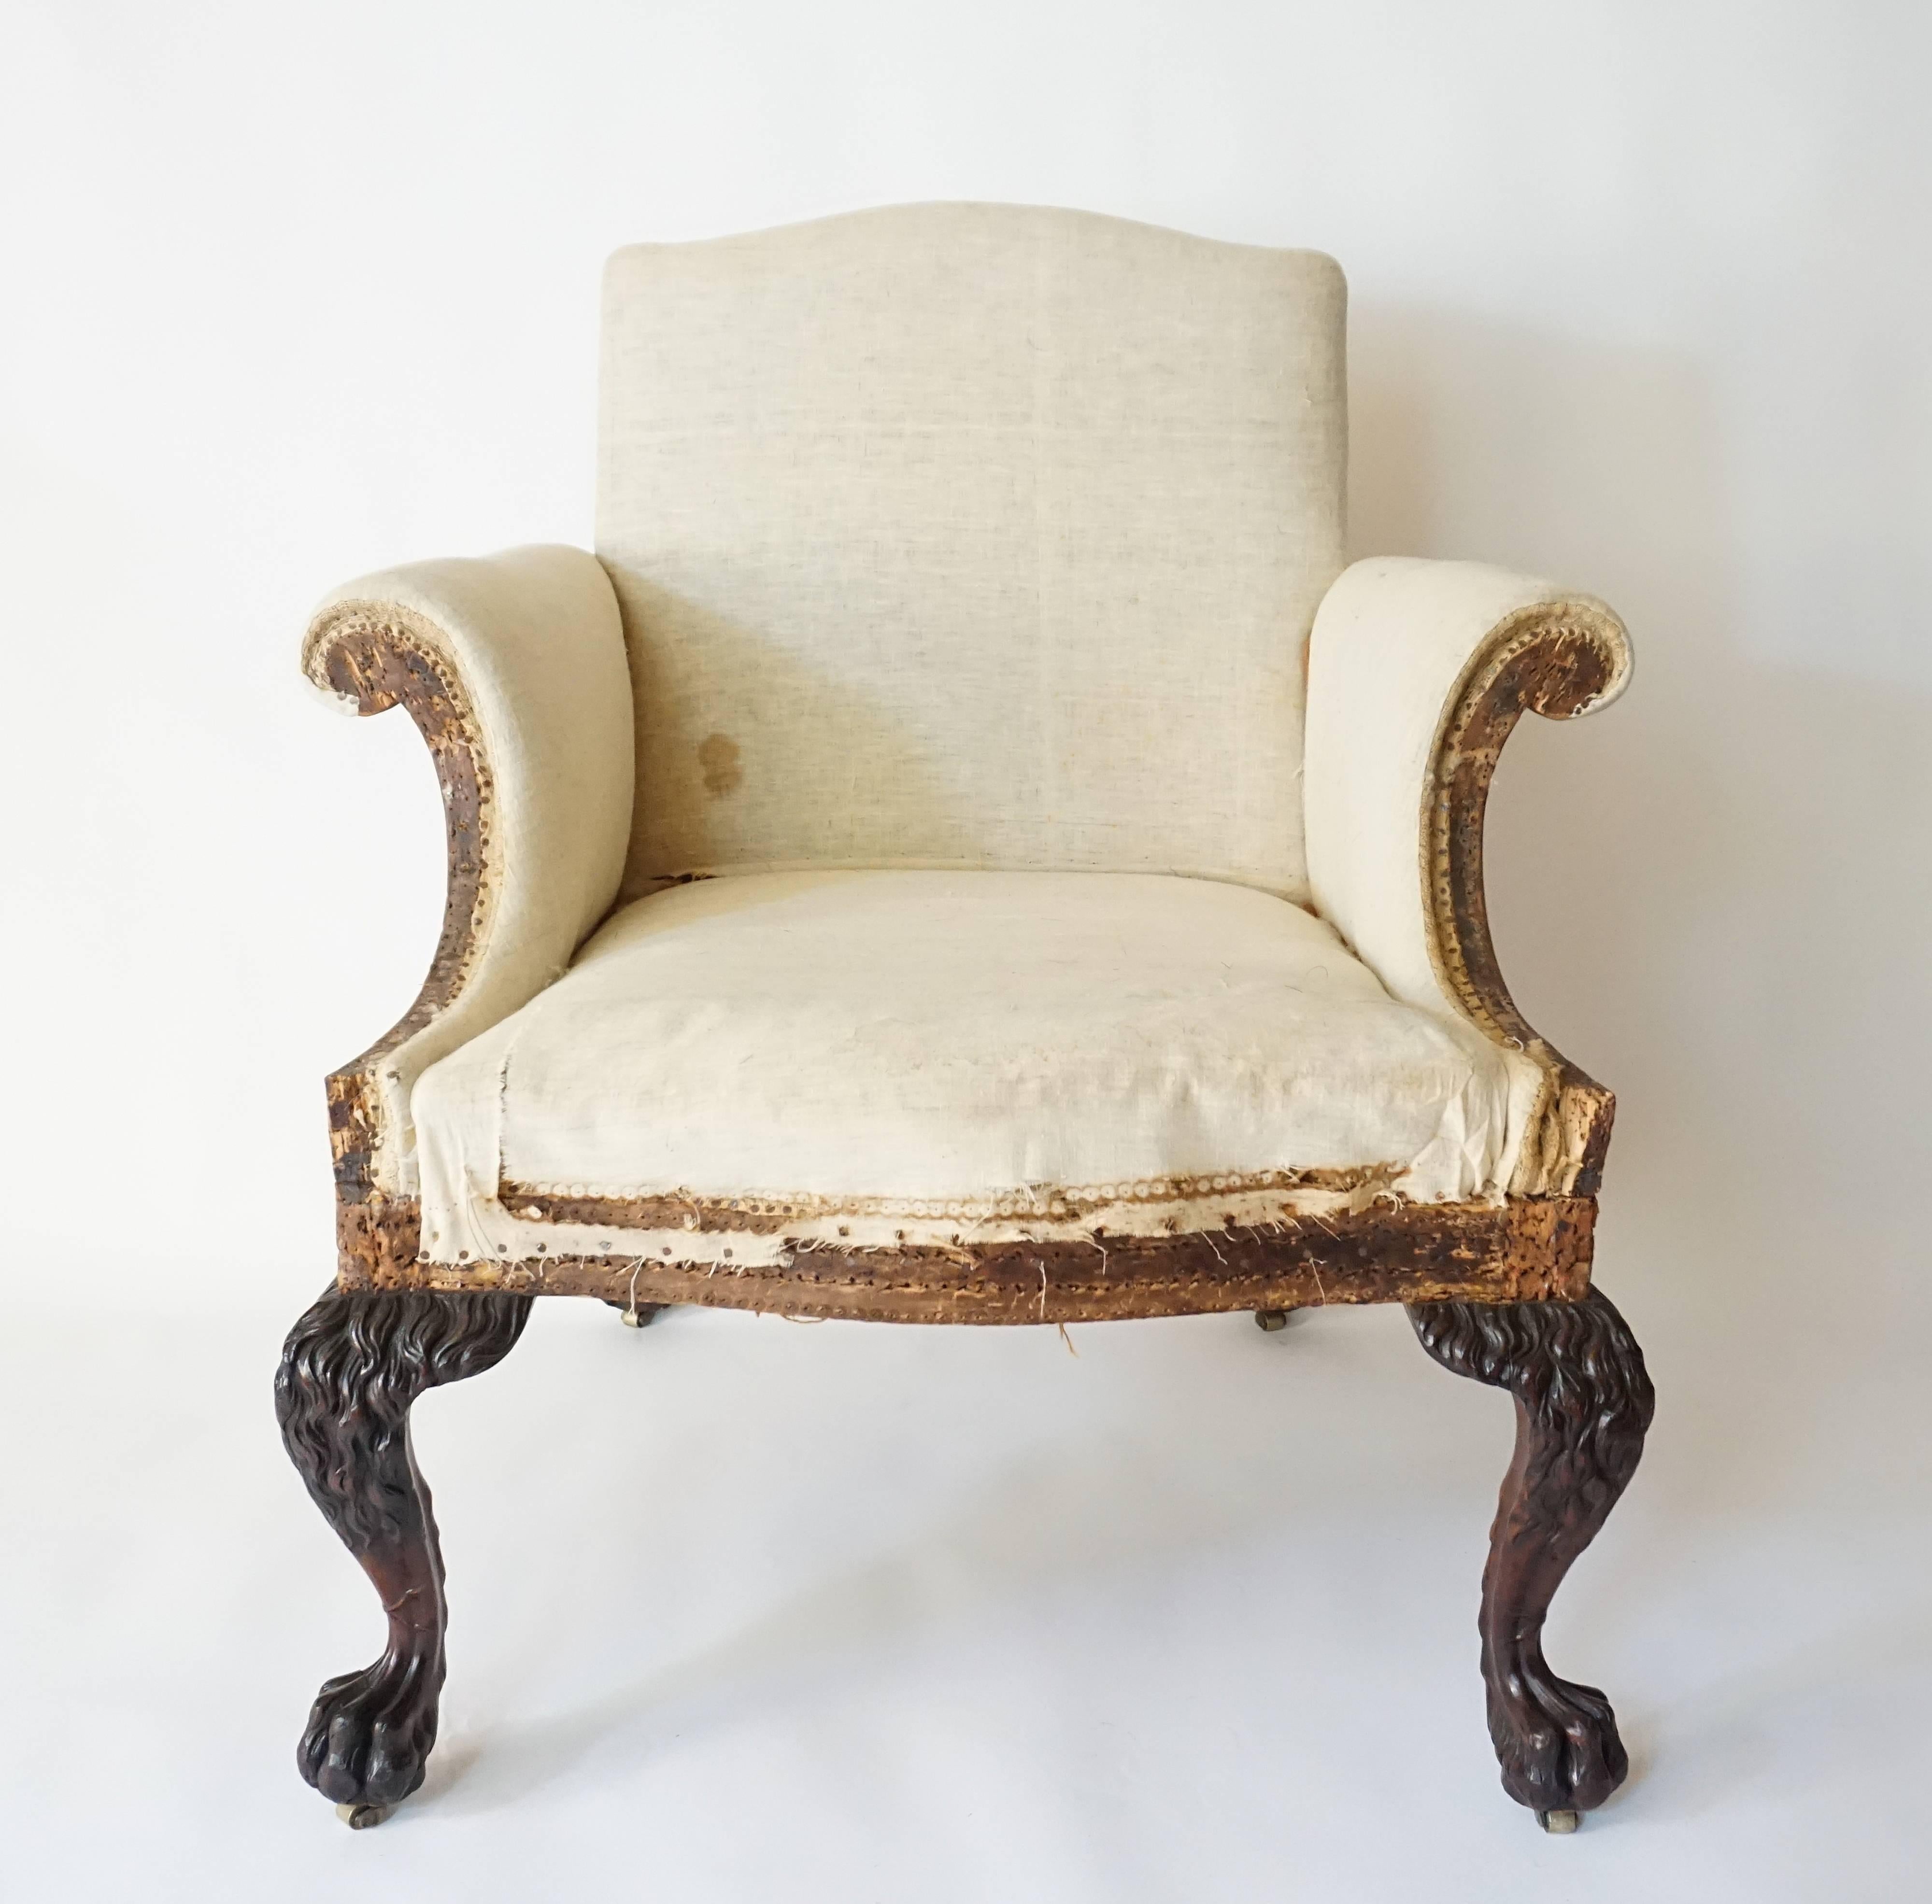 An important and exceptional circa 1905 George II style library armchair of large-scale by the renowned London firm of Lenygon & Company having upholstered 